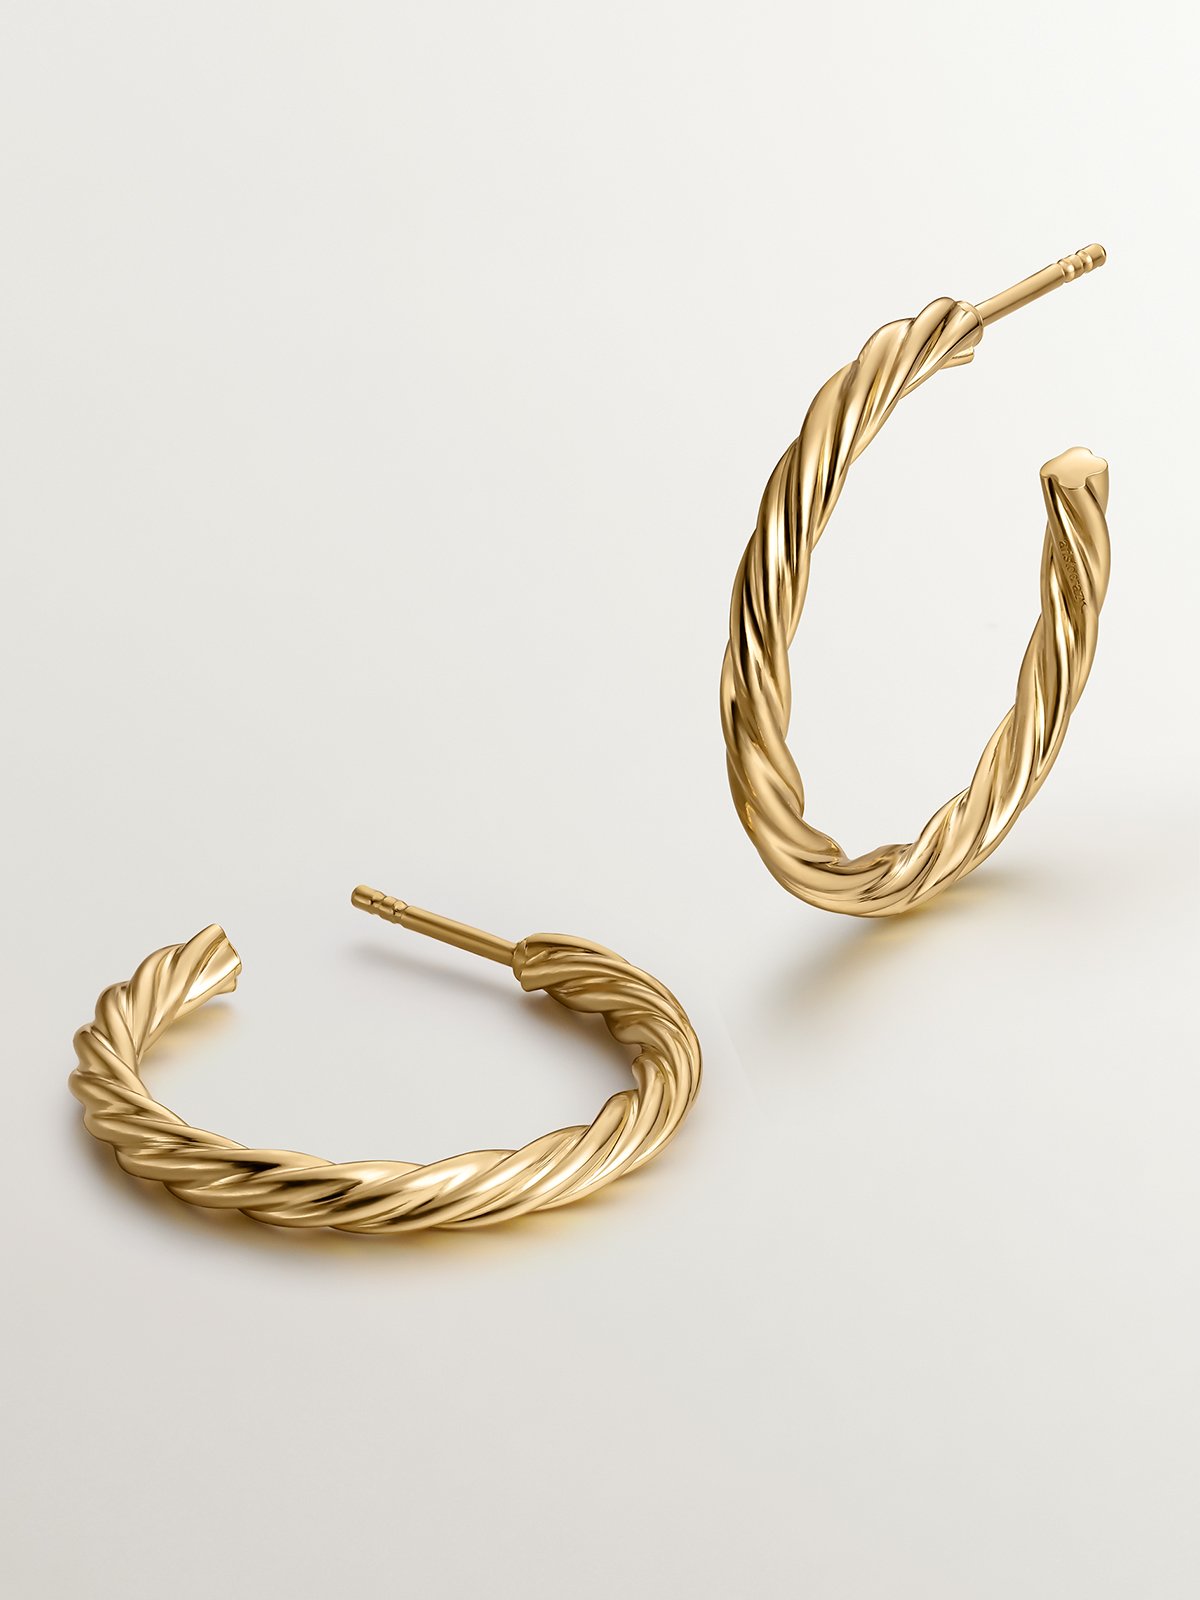 Large hoop earrings made of 925 silver coated in 18K yellow gold with fluted texture.